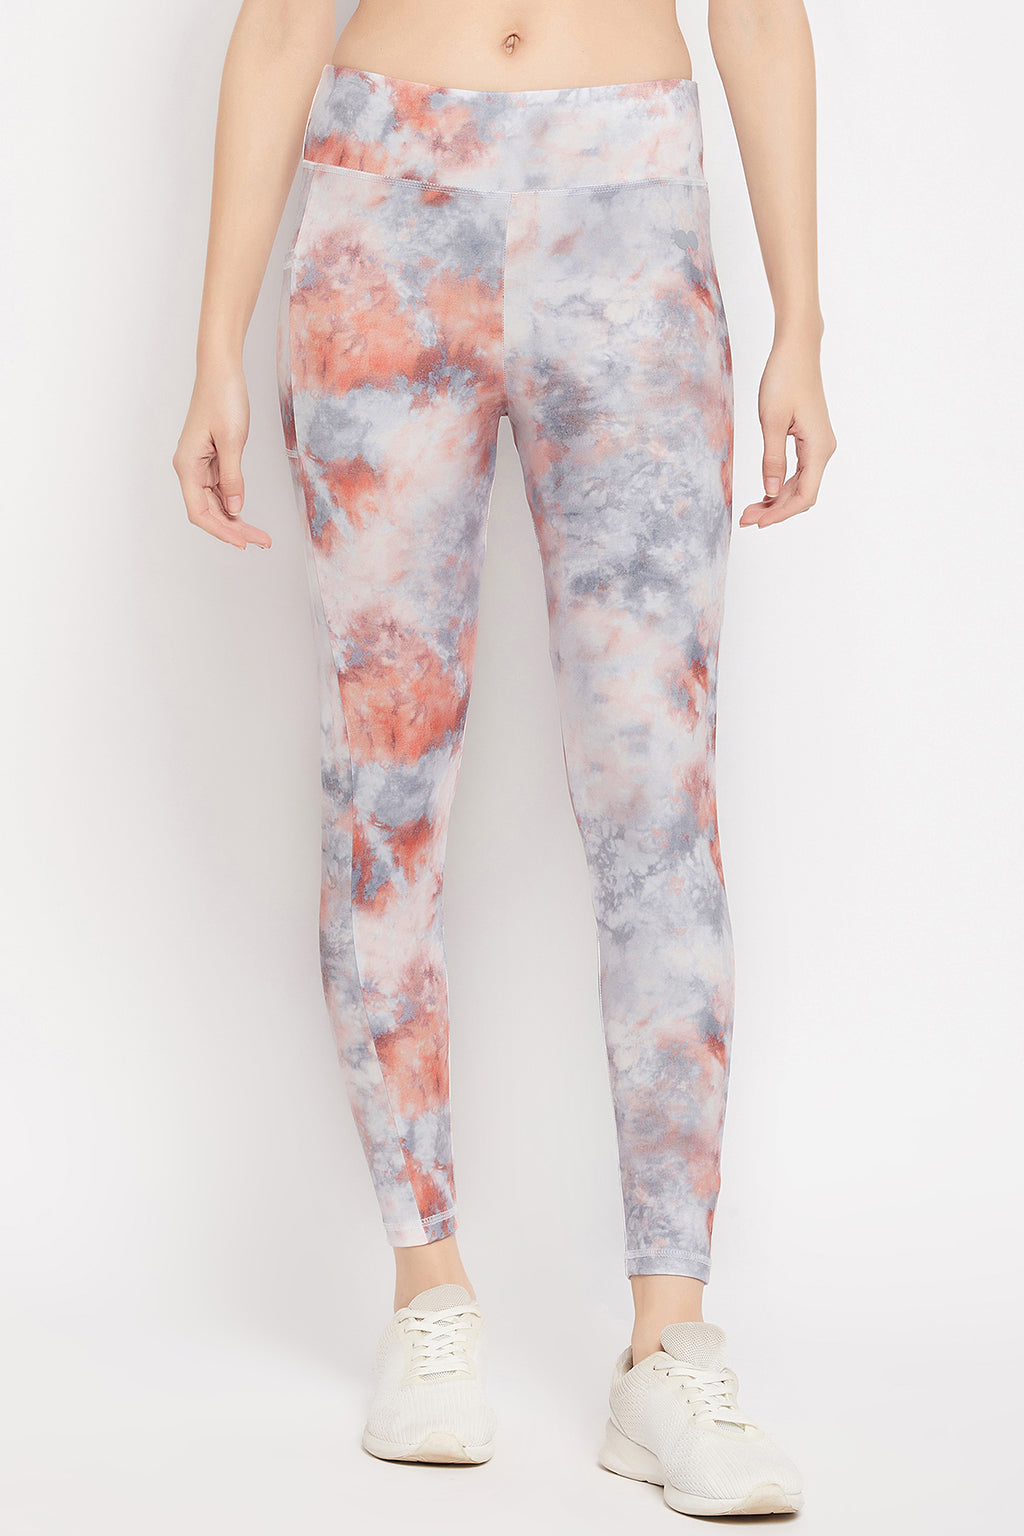 Grey High Rise Tie-Dye Print Active Tights with Side Pocket